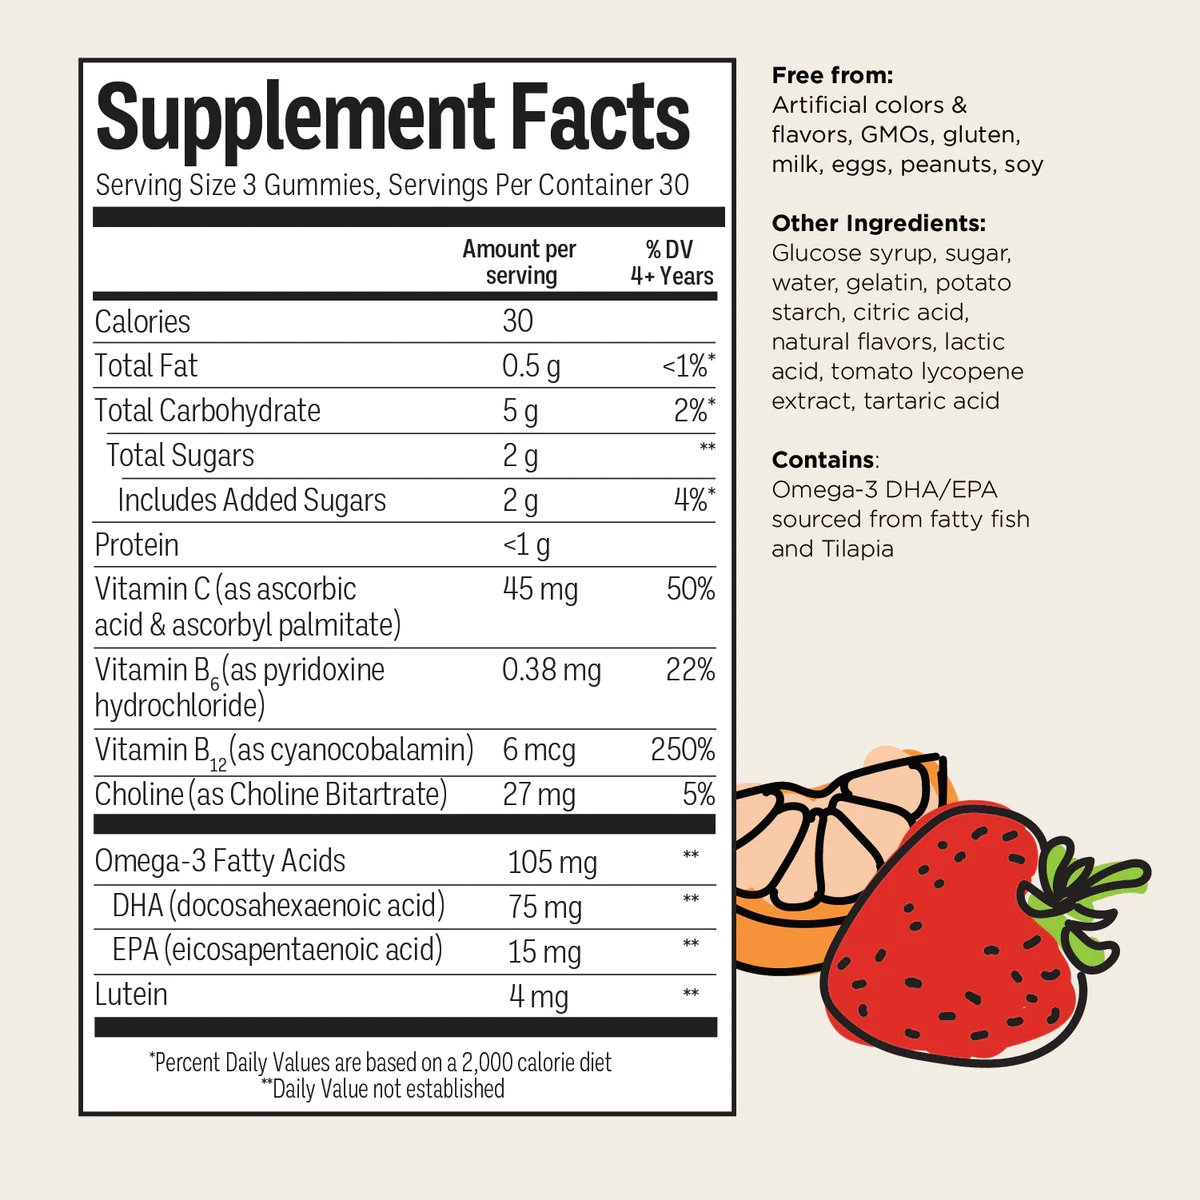 Supplement Facts and Ingredients for Brainiac’s BrainPack Daily Kids’ Gummies